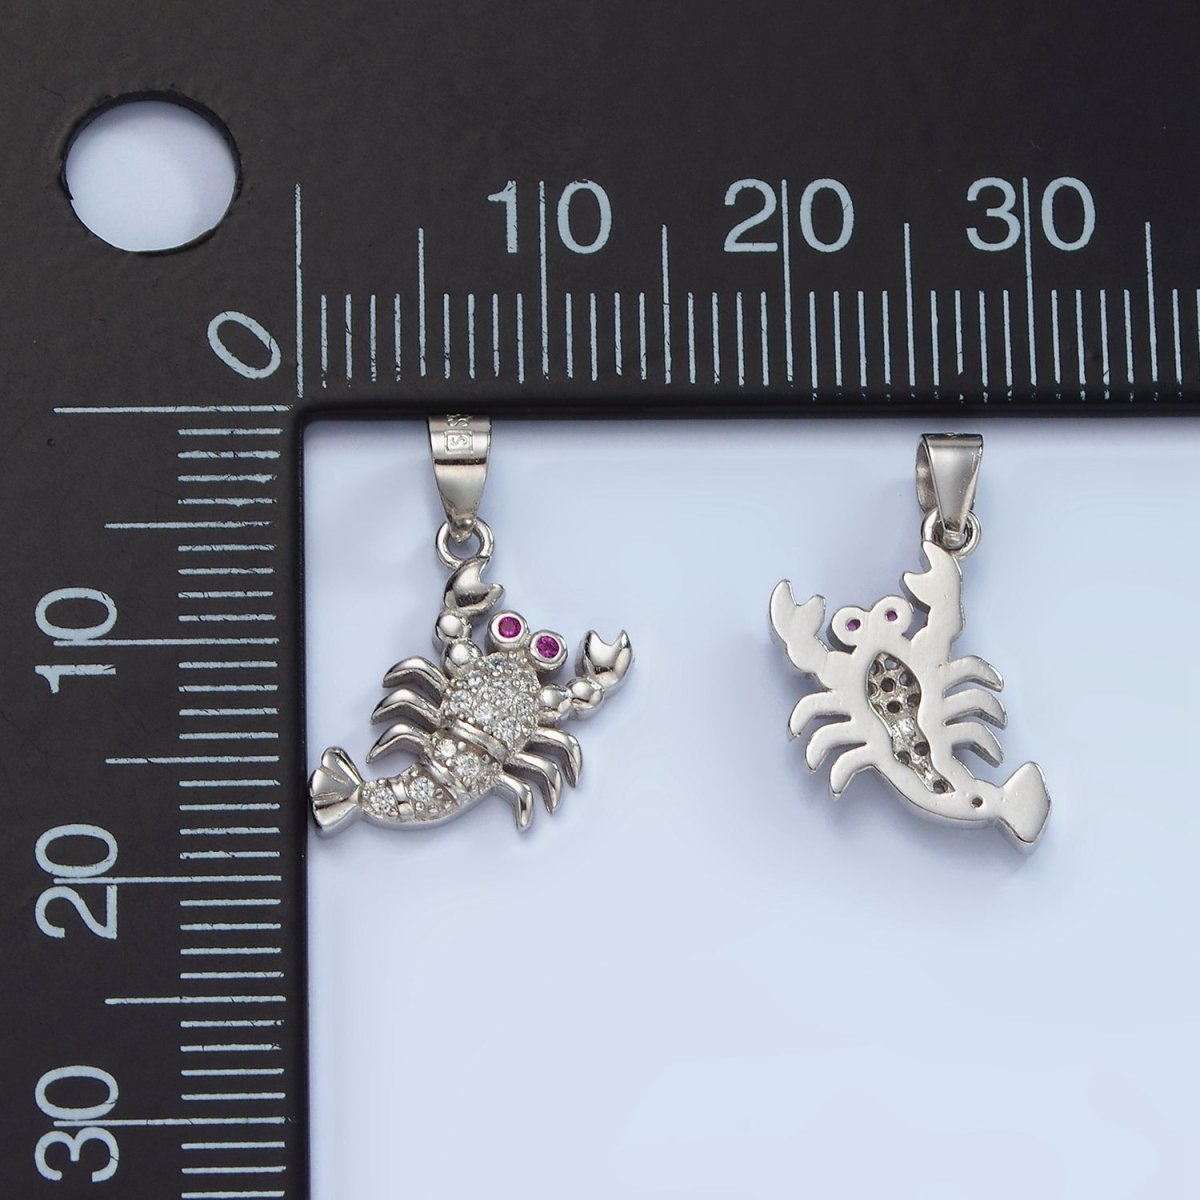 S925 Sterling Silver Fuchsia-Eyed Micro Paved CZ Lobster Animal Pendant | SL-463 - DLUXCA